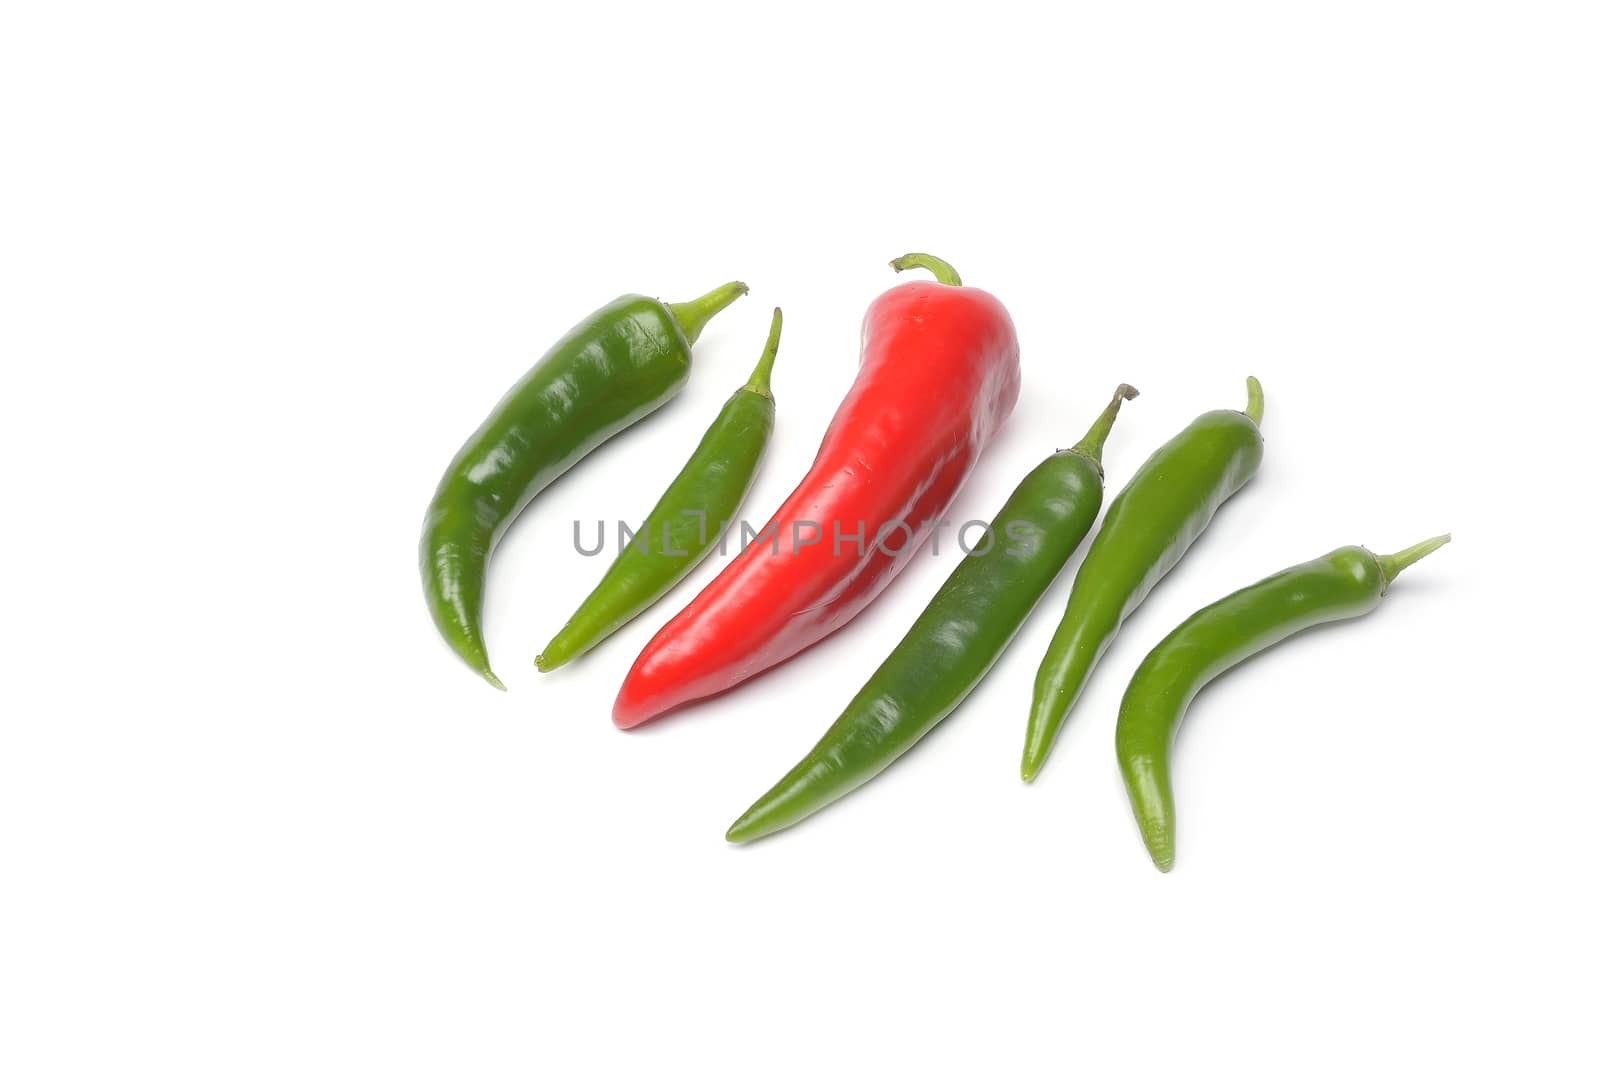 Some red and green hot peppers on a white background